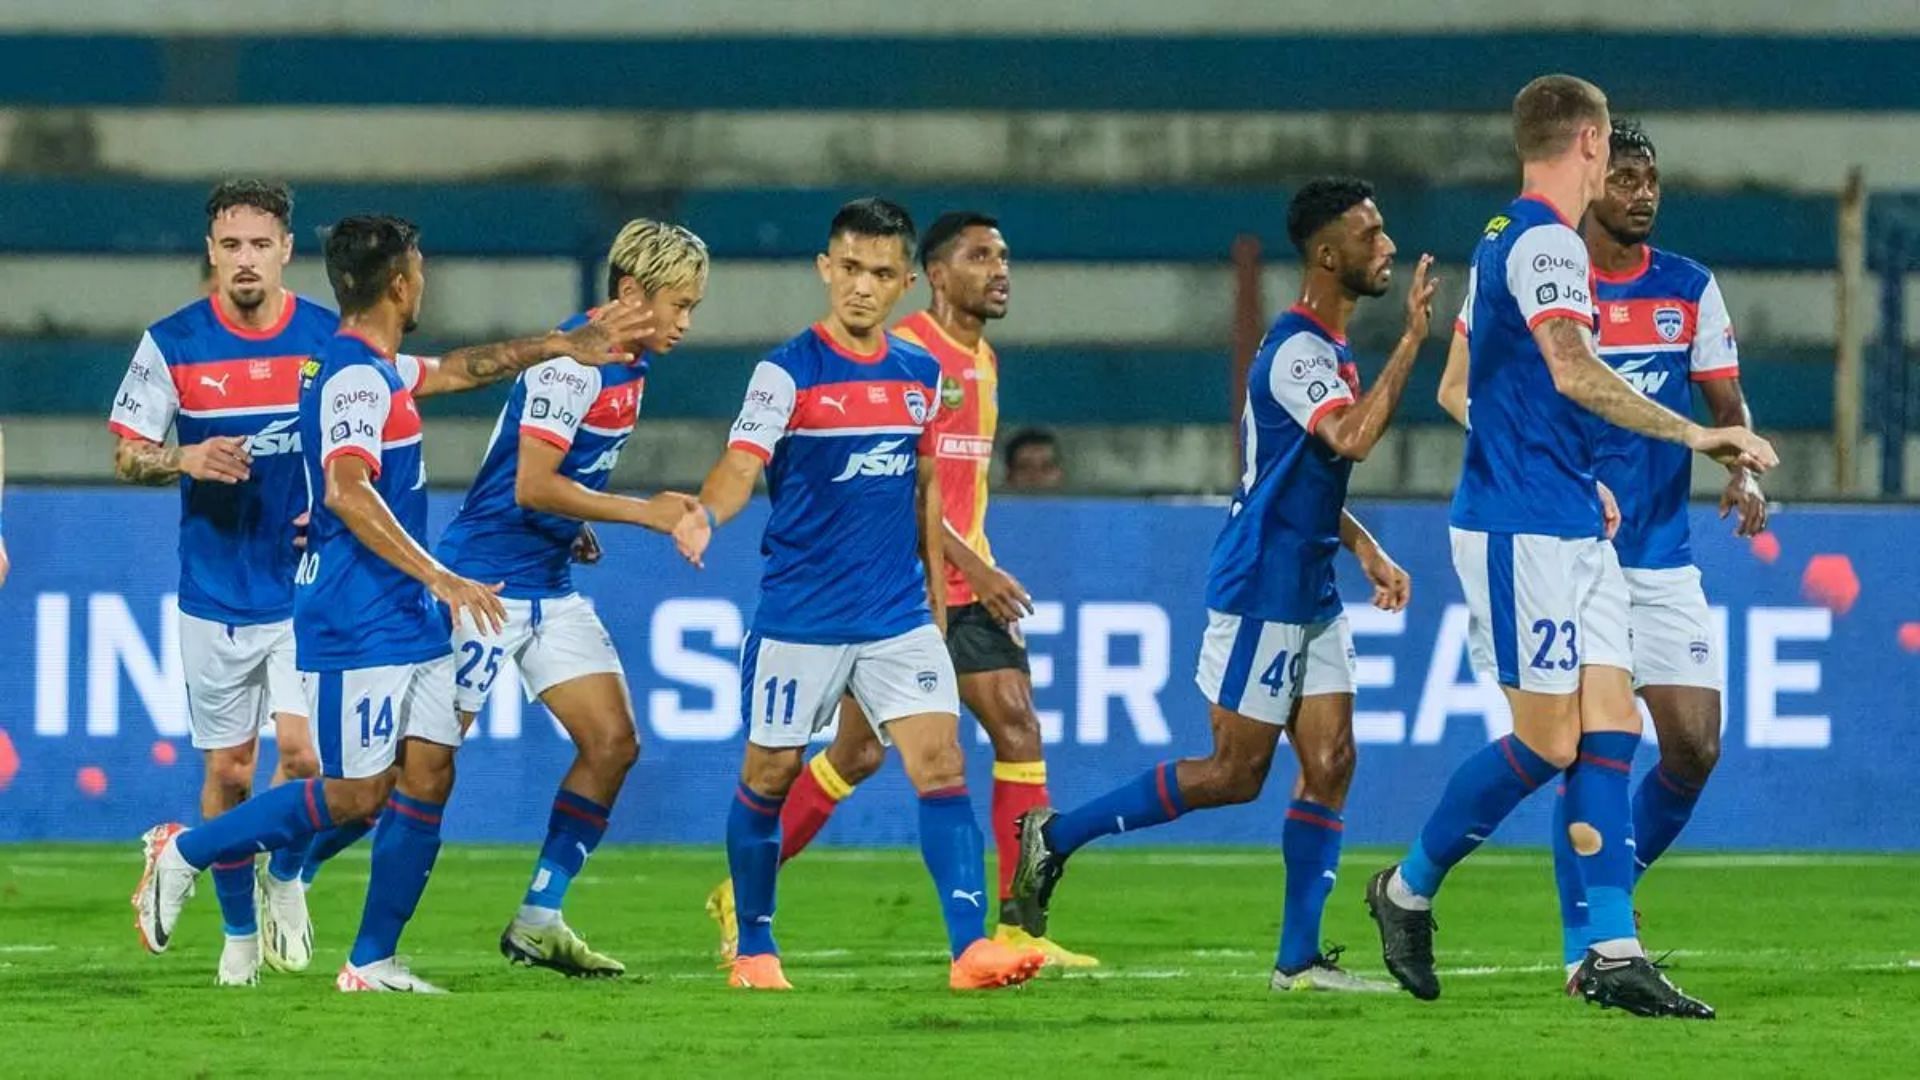 Can Bengaluru FC register their 2nd win of the season?